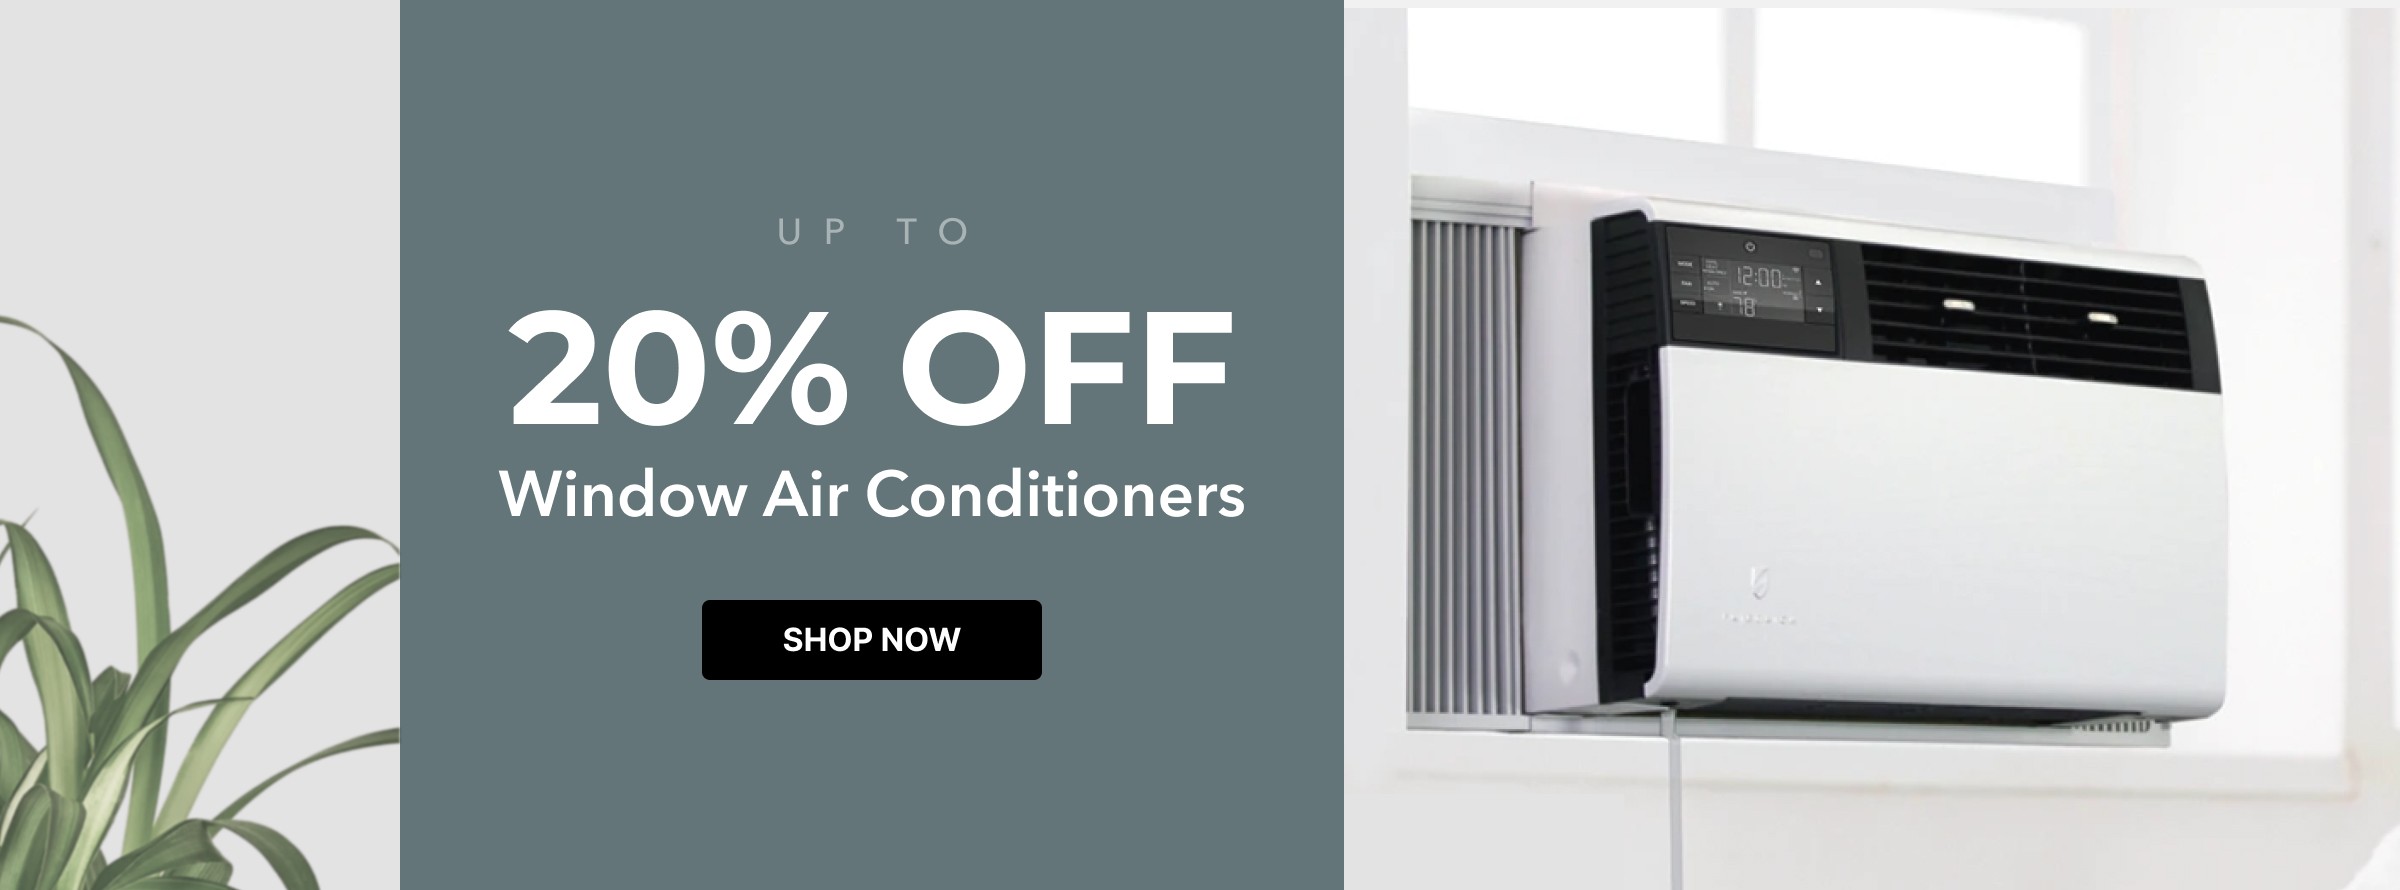 Up to 20% Off Window Air Conditioners